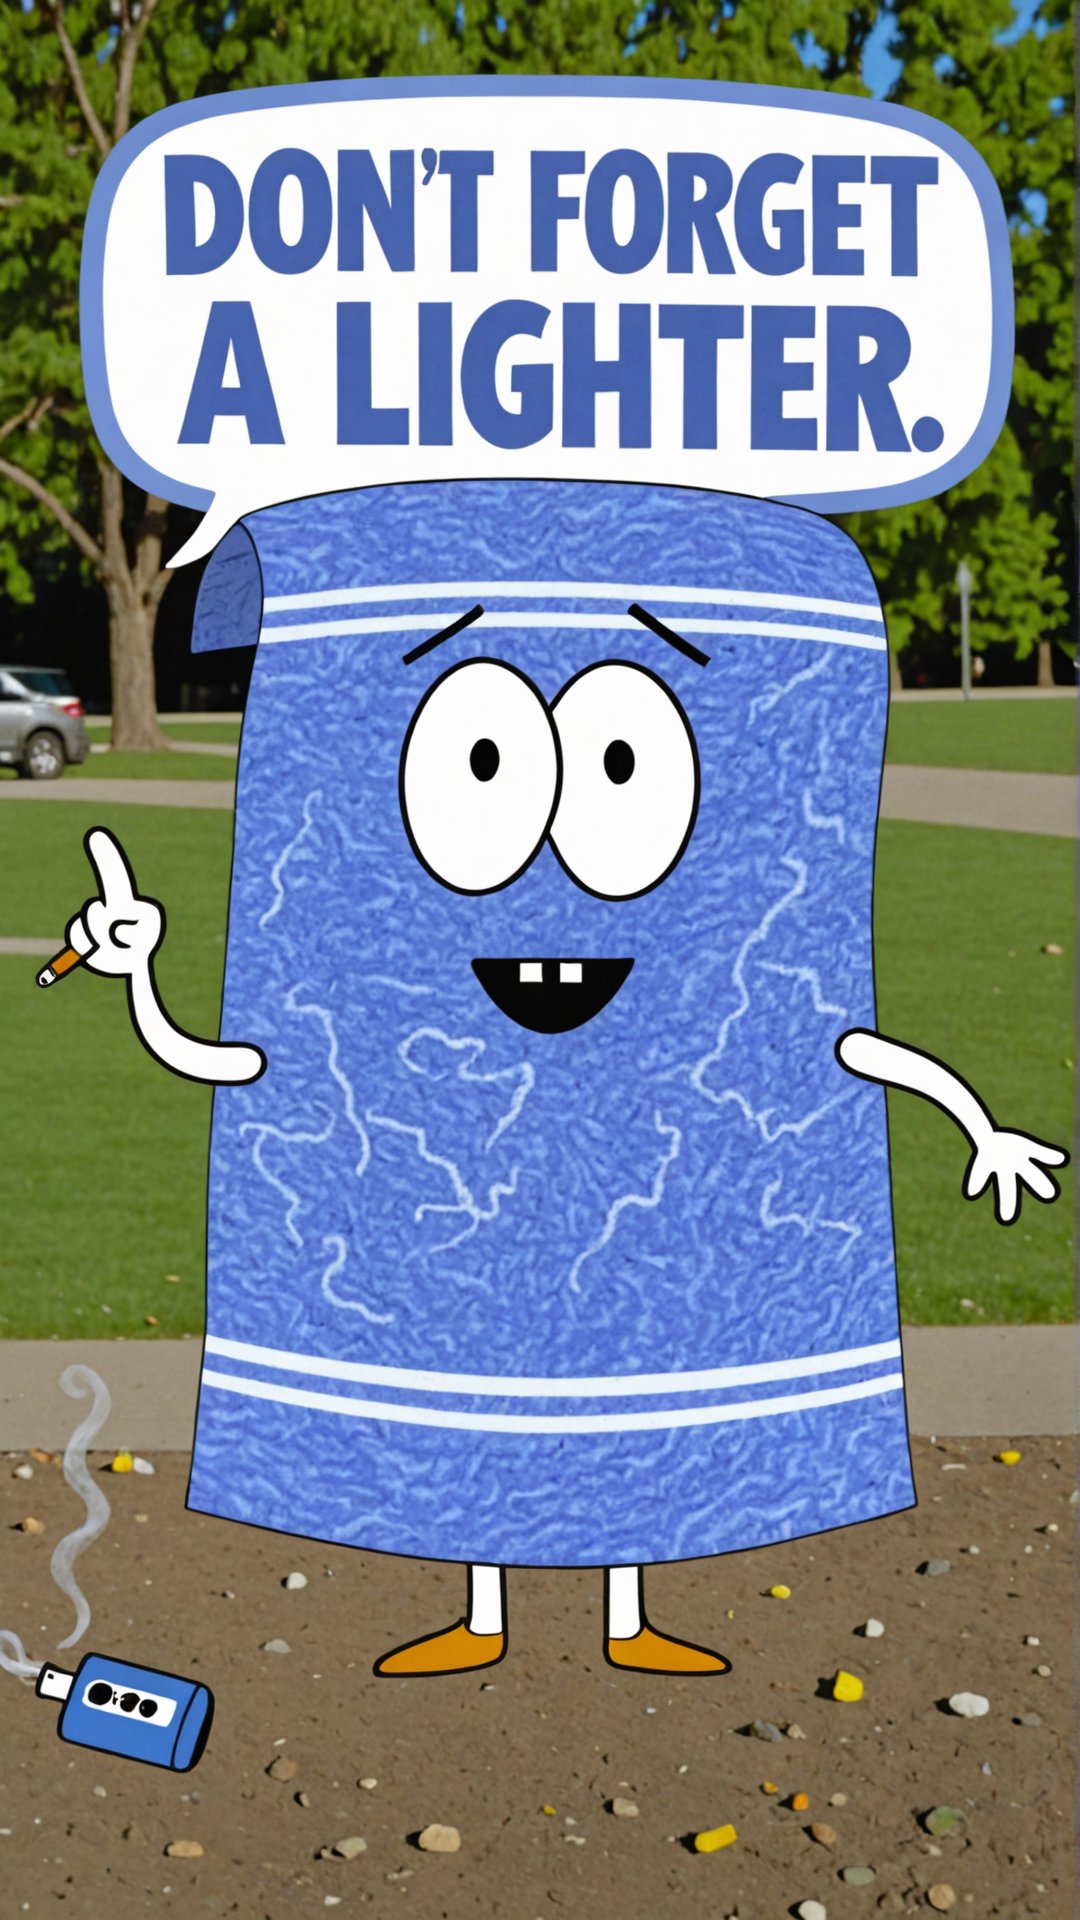 Photo of Towelie smoking weed at the park with a text bubble that says "dont forget a lighter" <lora:Towelie_v420:0.8>